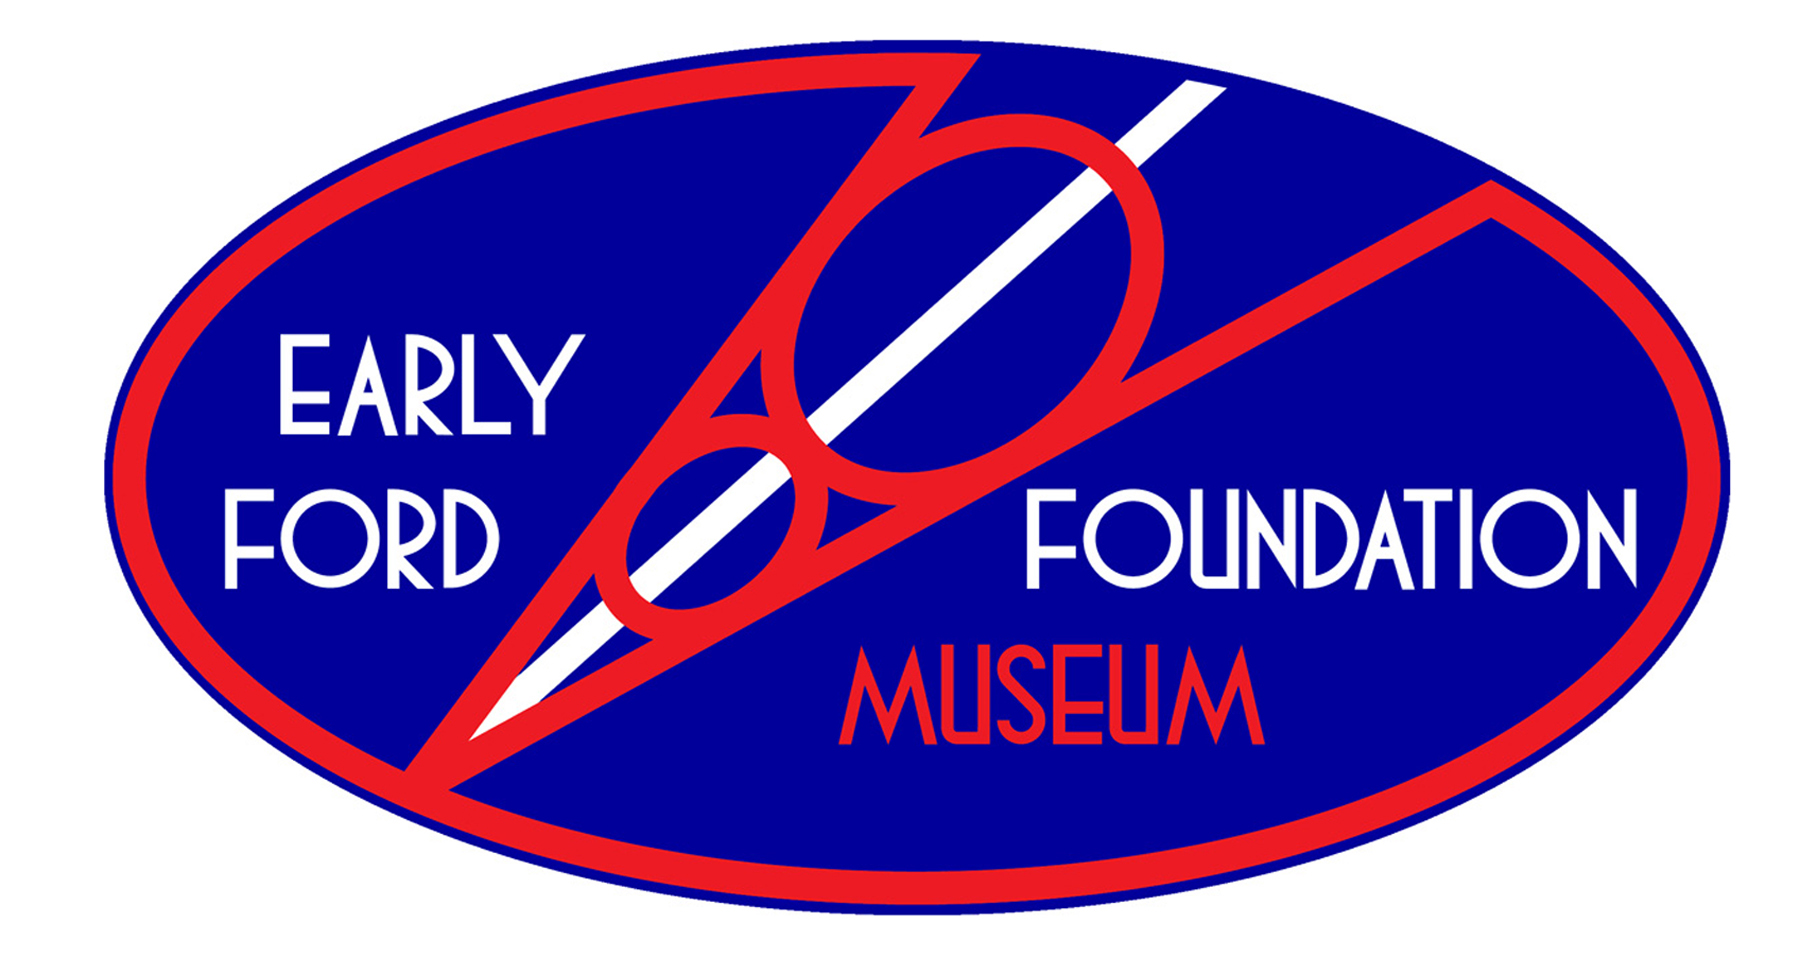 The Early Ford V-8 Foundation Museum